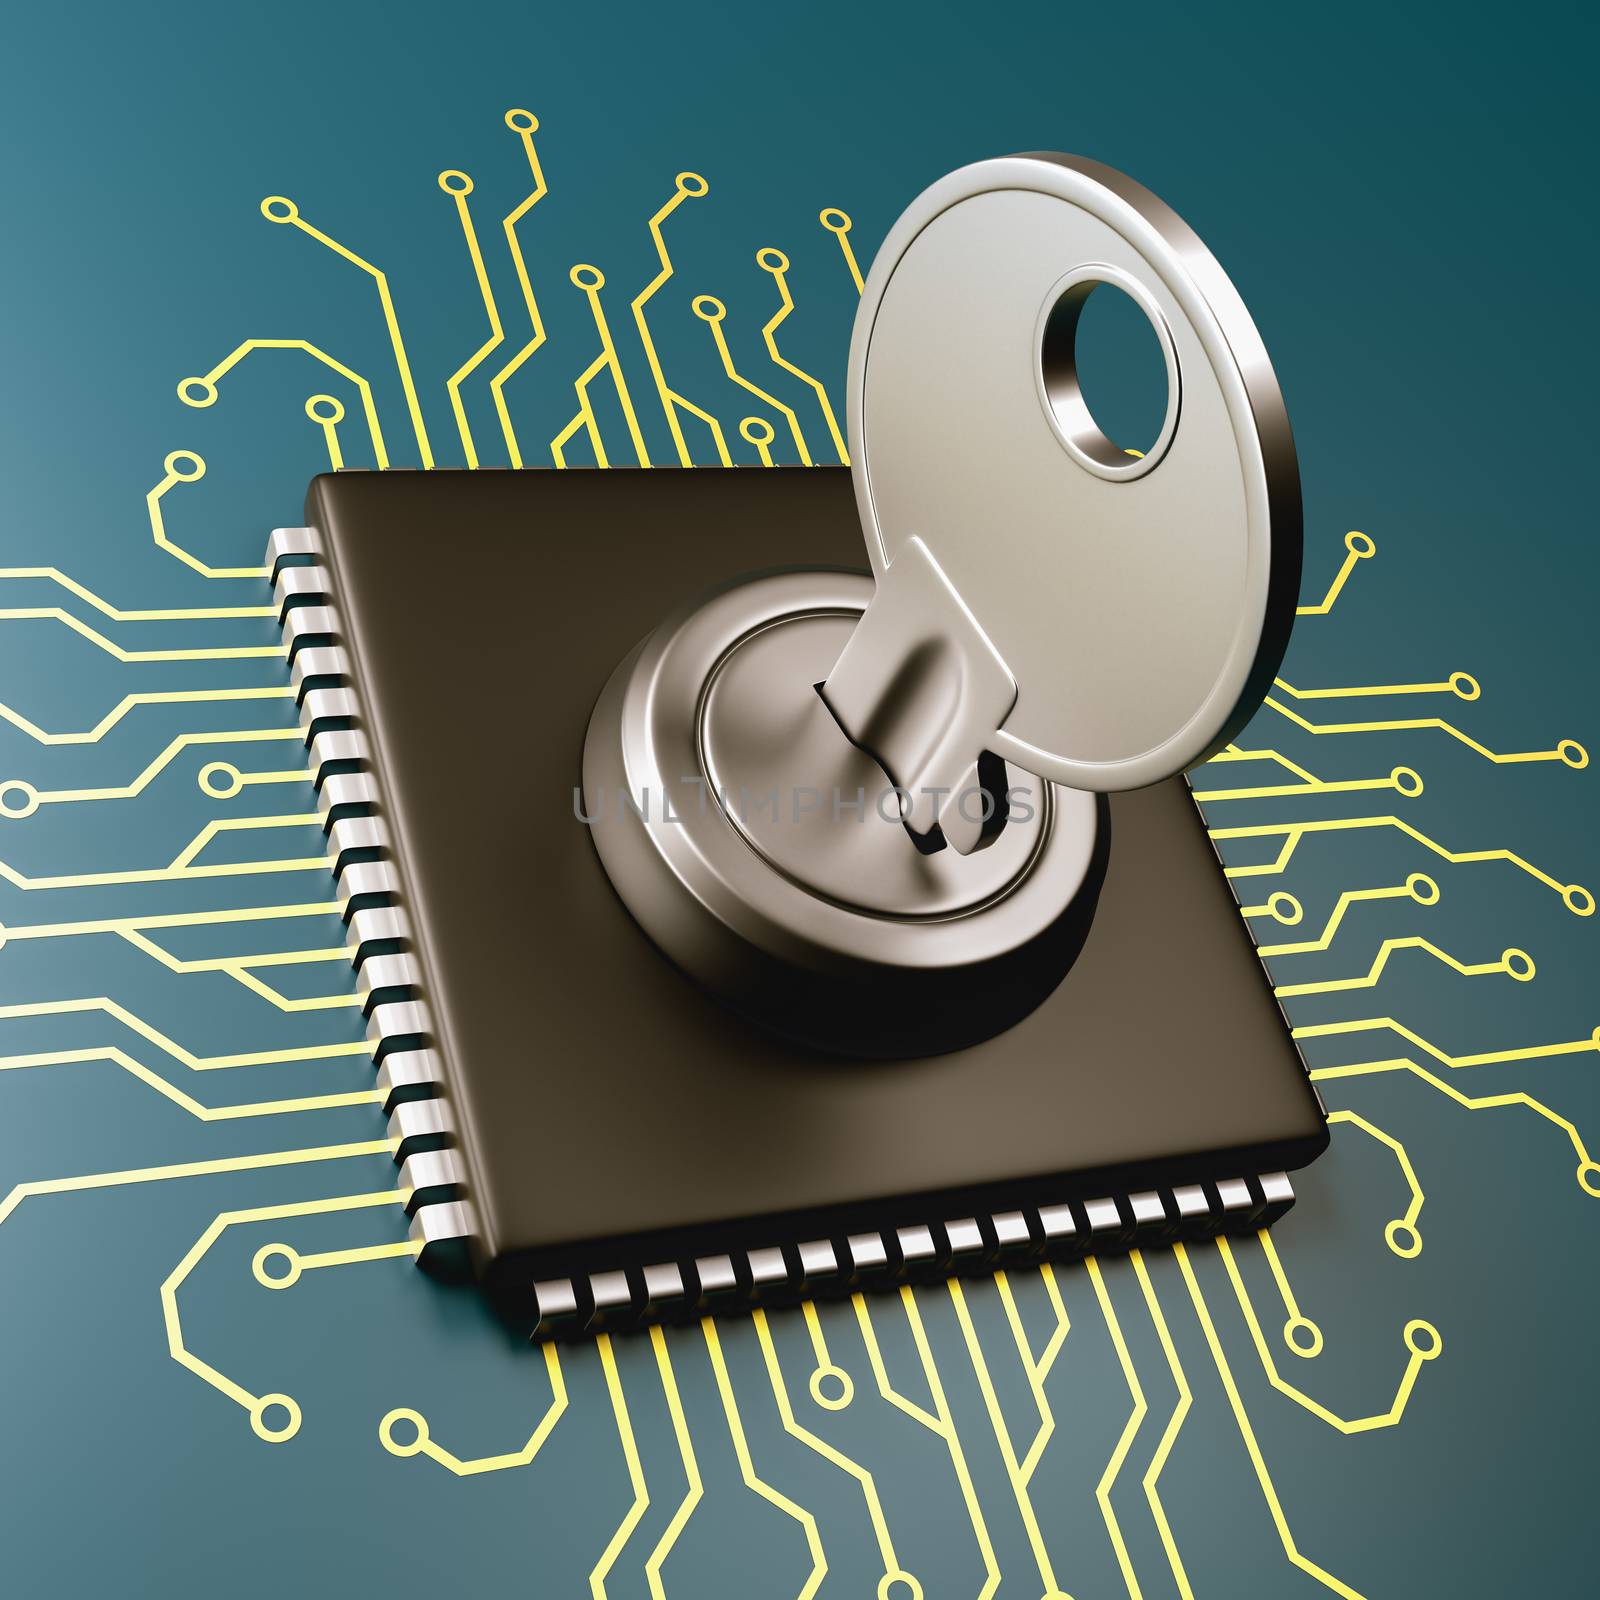 Computer Processor with Key 3D Illustration, Security Concept